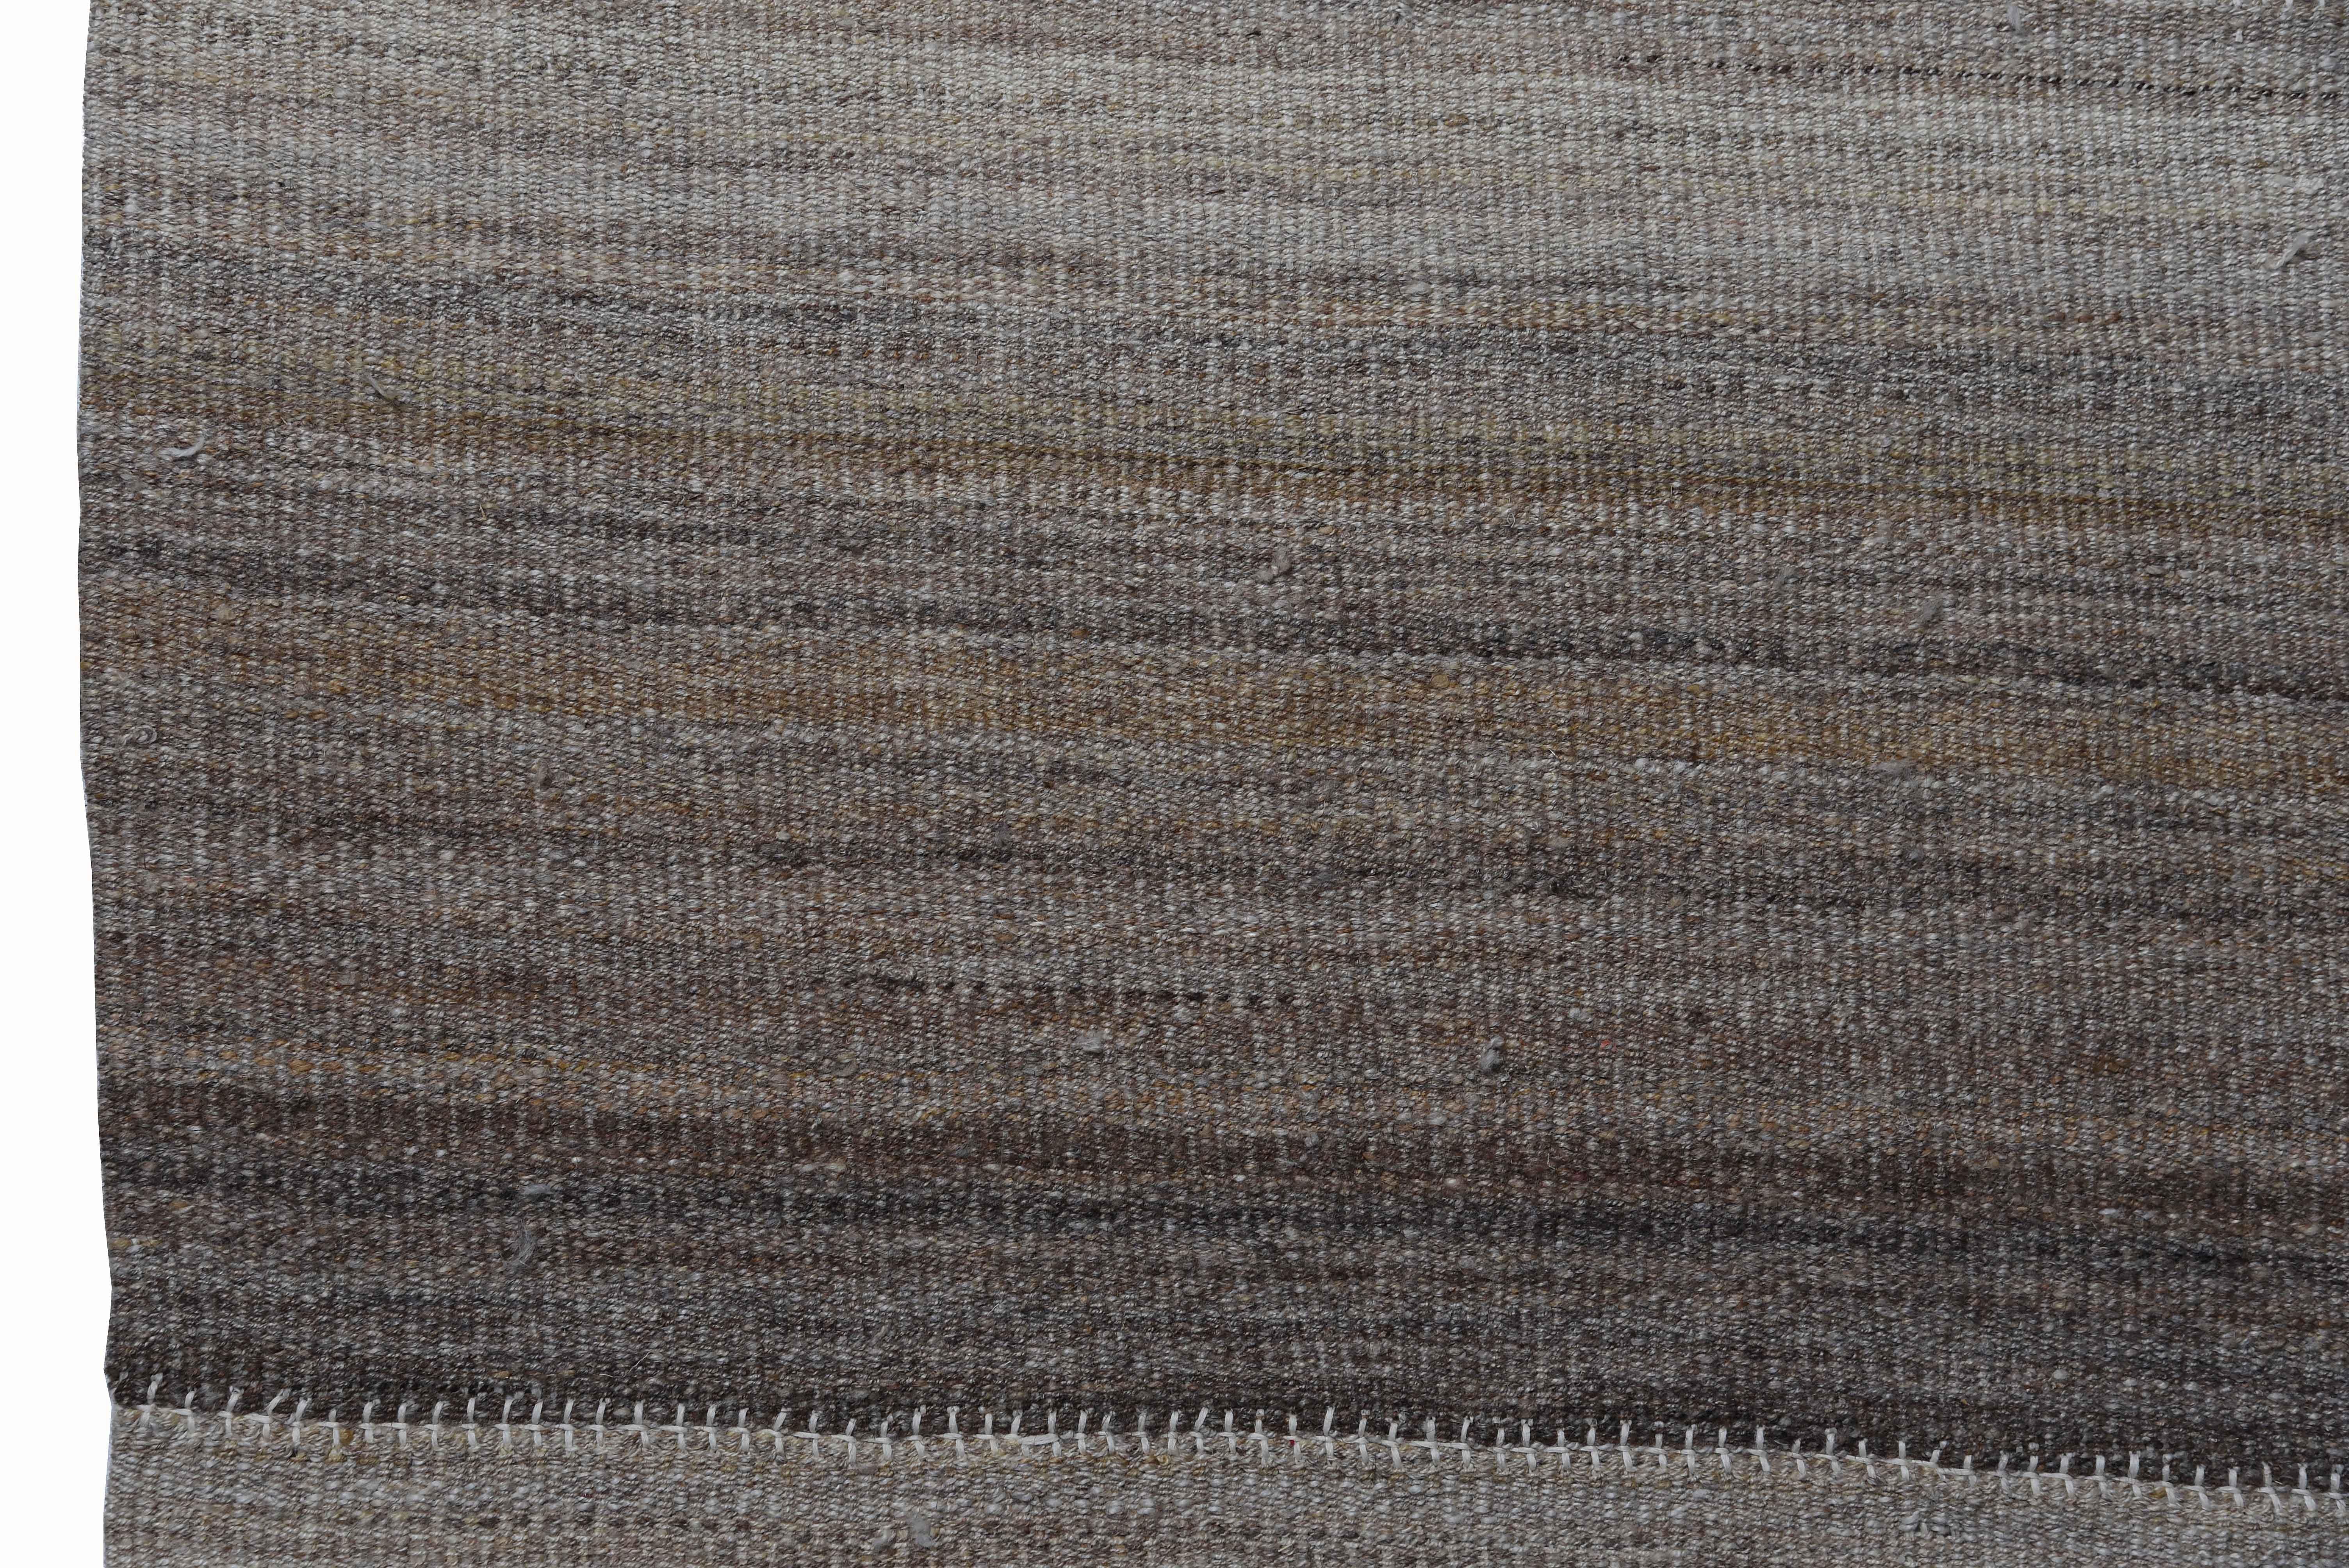 Modern Turkish rug handwoven from the finest sheep’s wool and colored with all-natural vegetable dyes that are safe for humans and pets. It’s a traditional Kilim flat-weave design featuring modern brown and gray stripes on an ivory field. It’s a